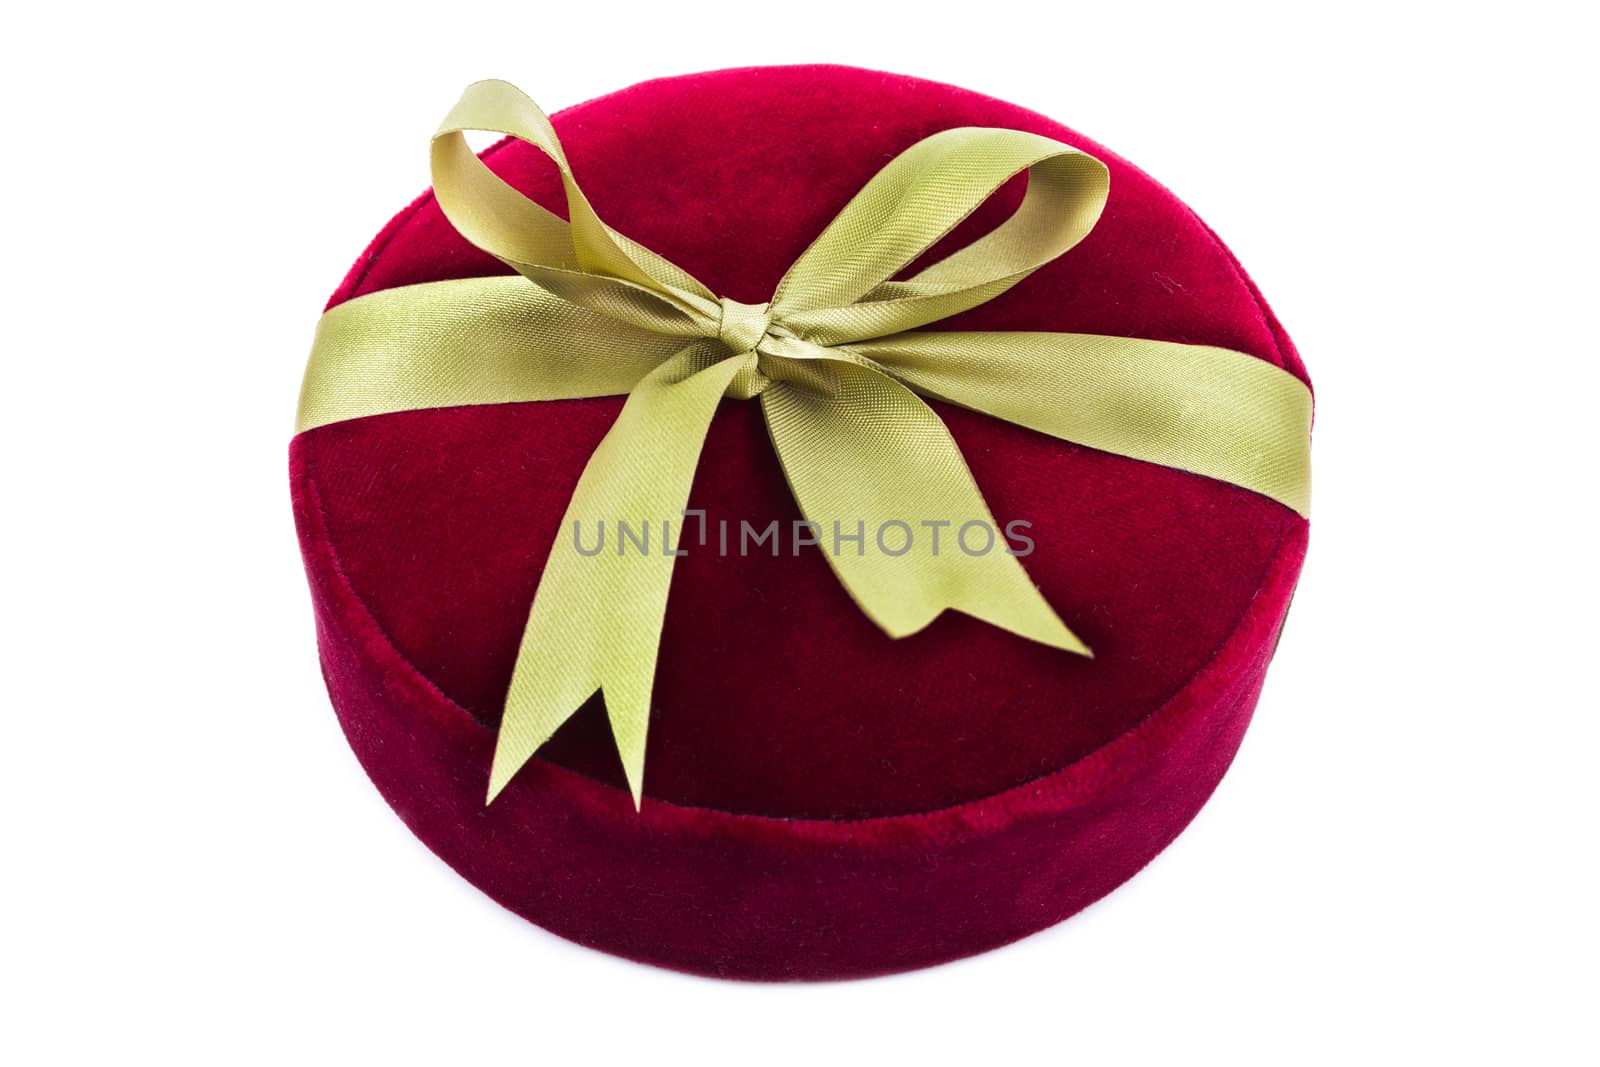 Luxury gift box in dark red shades with green satin ribbon and bow isolated over white background.